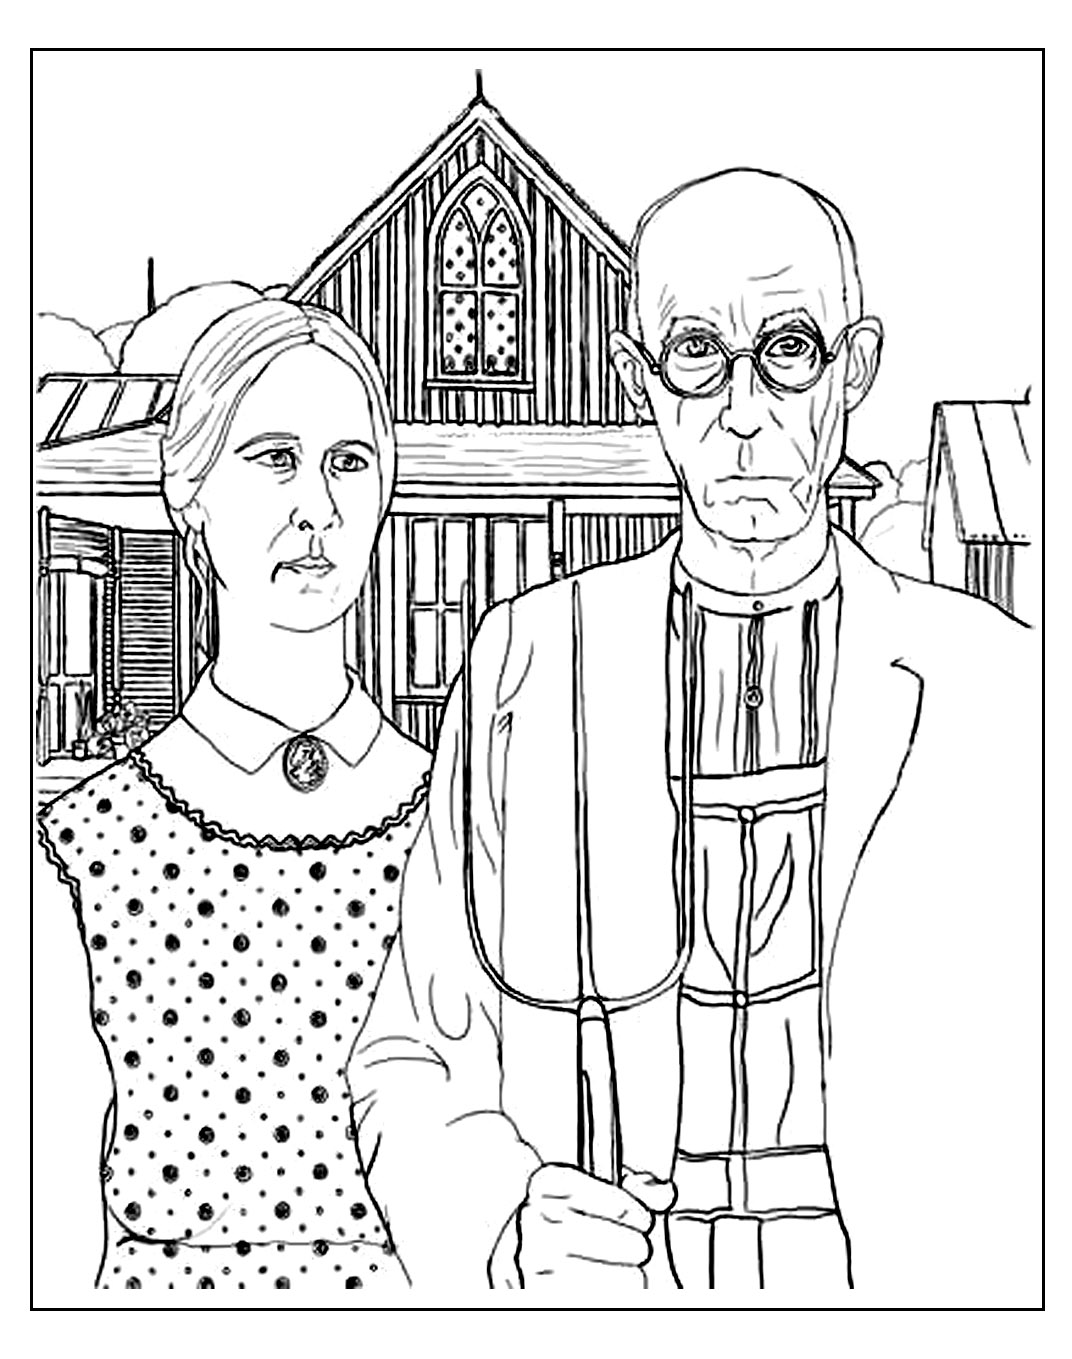 Coloring page for adult of American Gothic, the famous painting by Grant Wood, depicting the rural american midwest